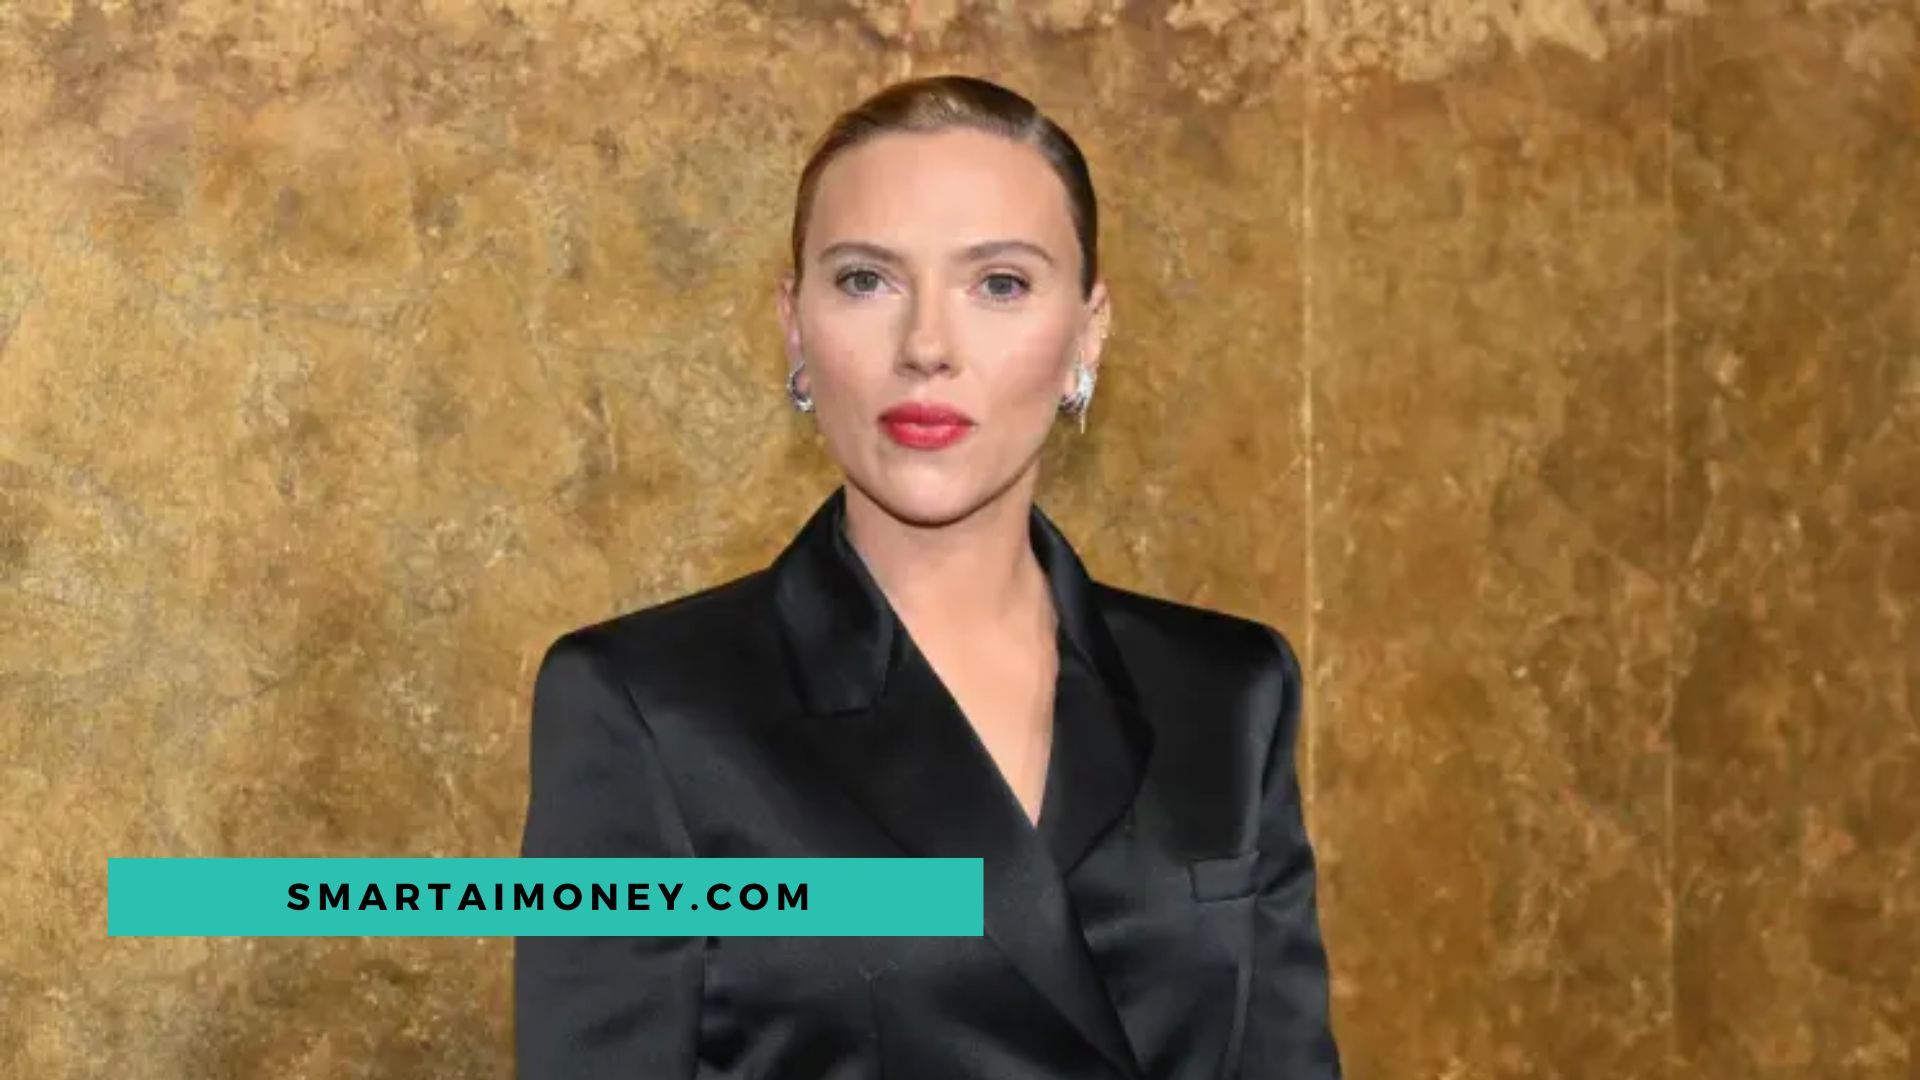 What is the Controversy Surrounding Lisa AI and Scarlett Johansson?